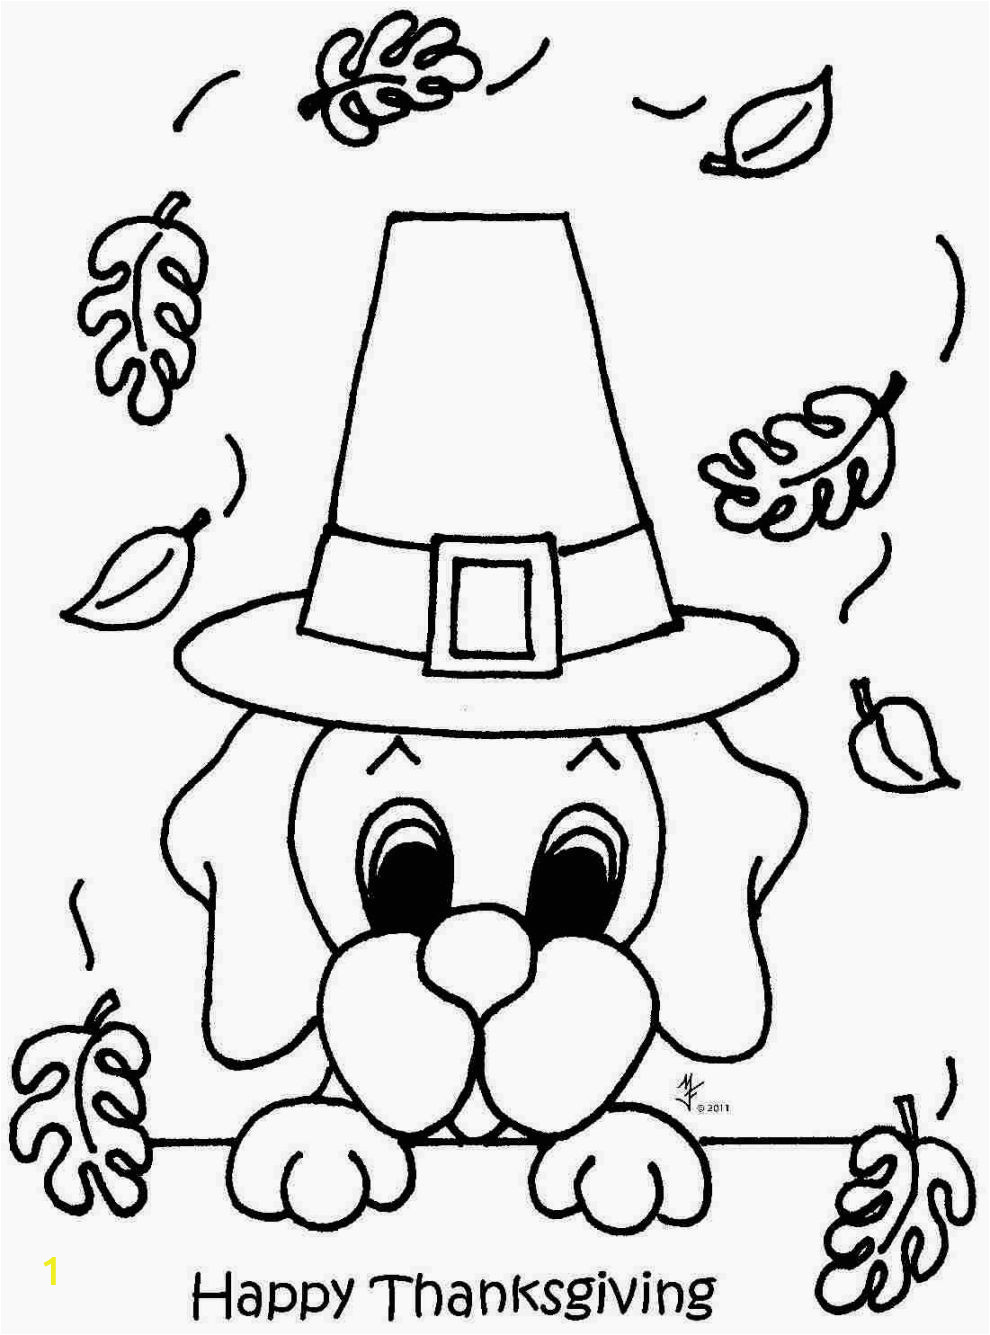 Disney Thanksgiving Coloring Pages Coloring Pages Thanksgiving